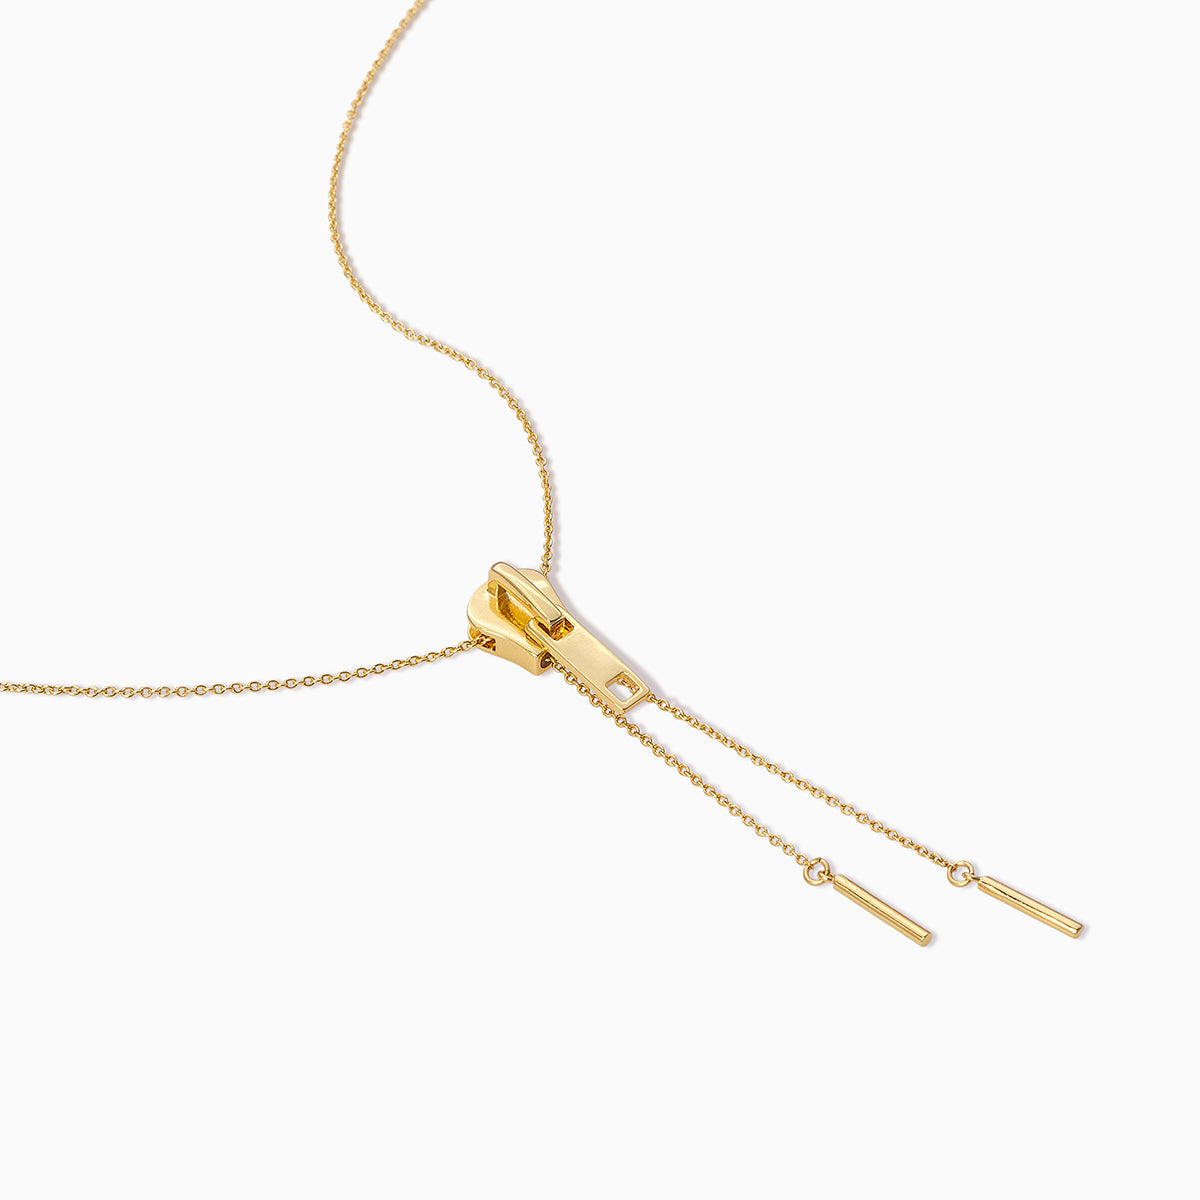 Gold Pavé Full Heart Pendant Necklace | Women's Jewelry by Uncommon James